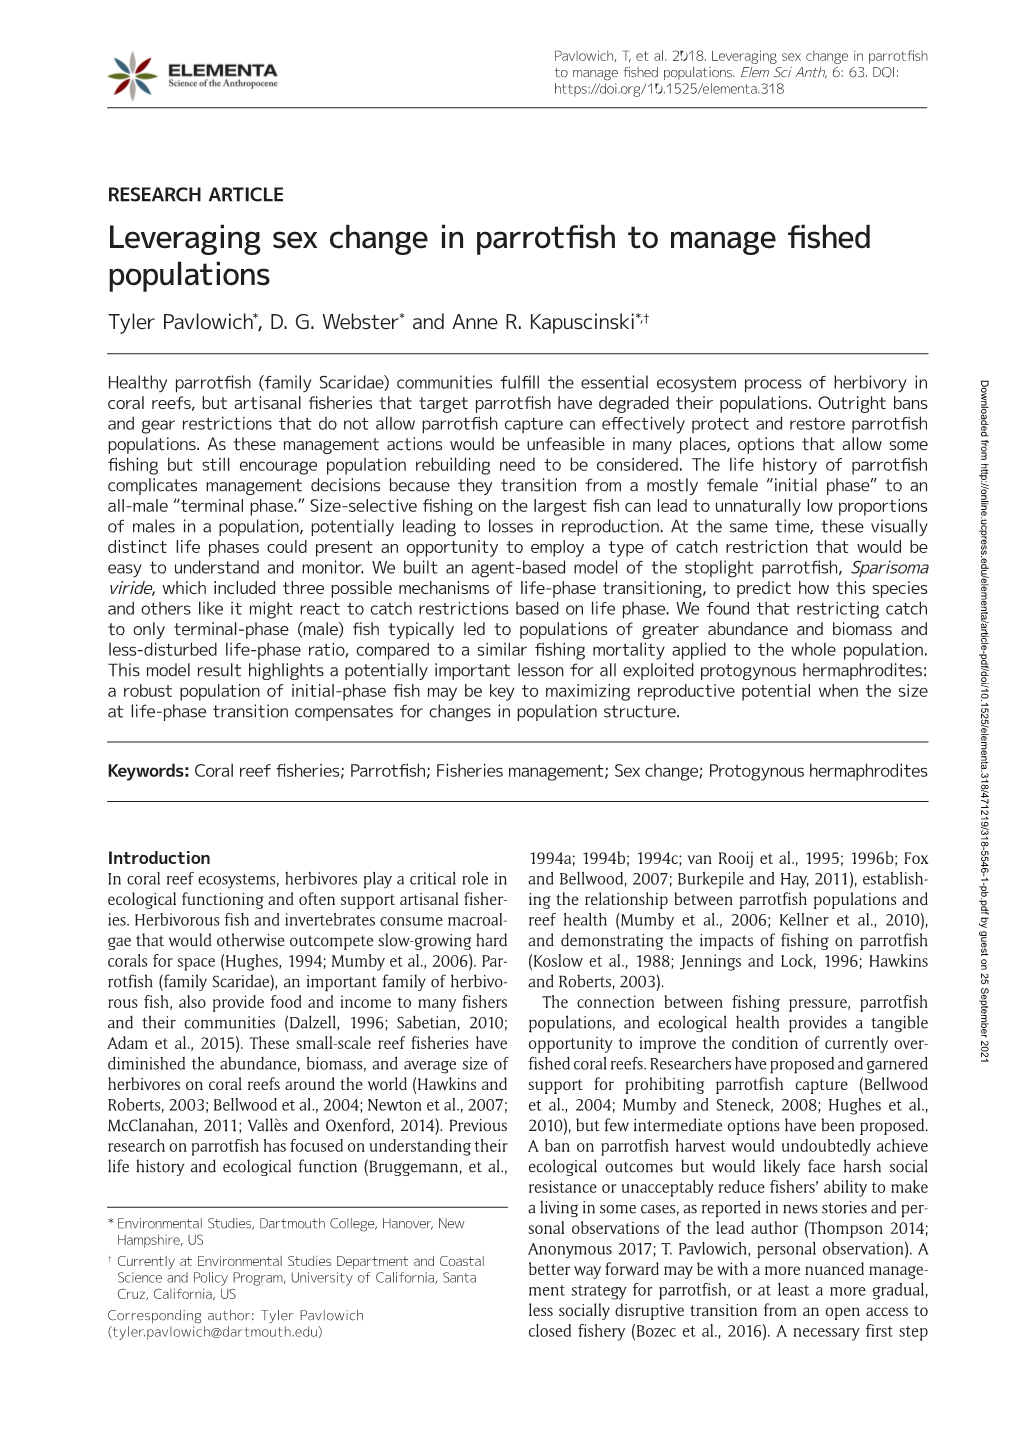 Leveraging Sex Change in Parrotfish to Manage Fished Populations.Elem Sci Anth, 6: 63